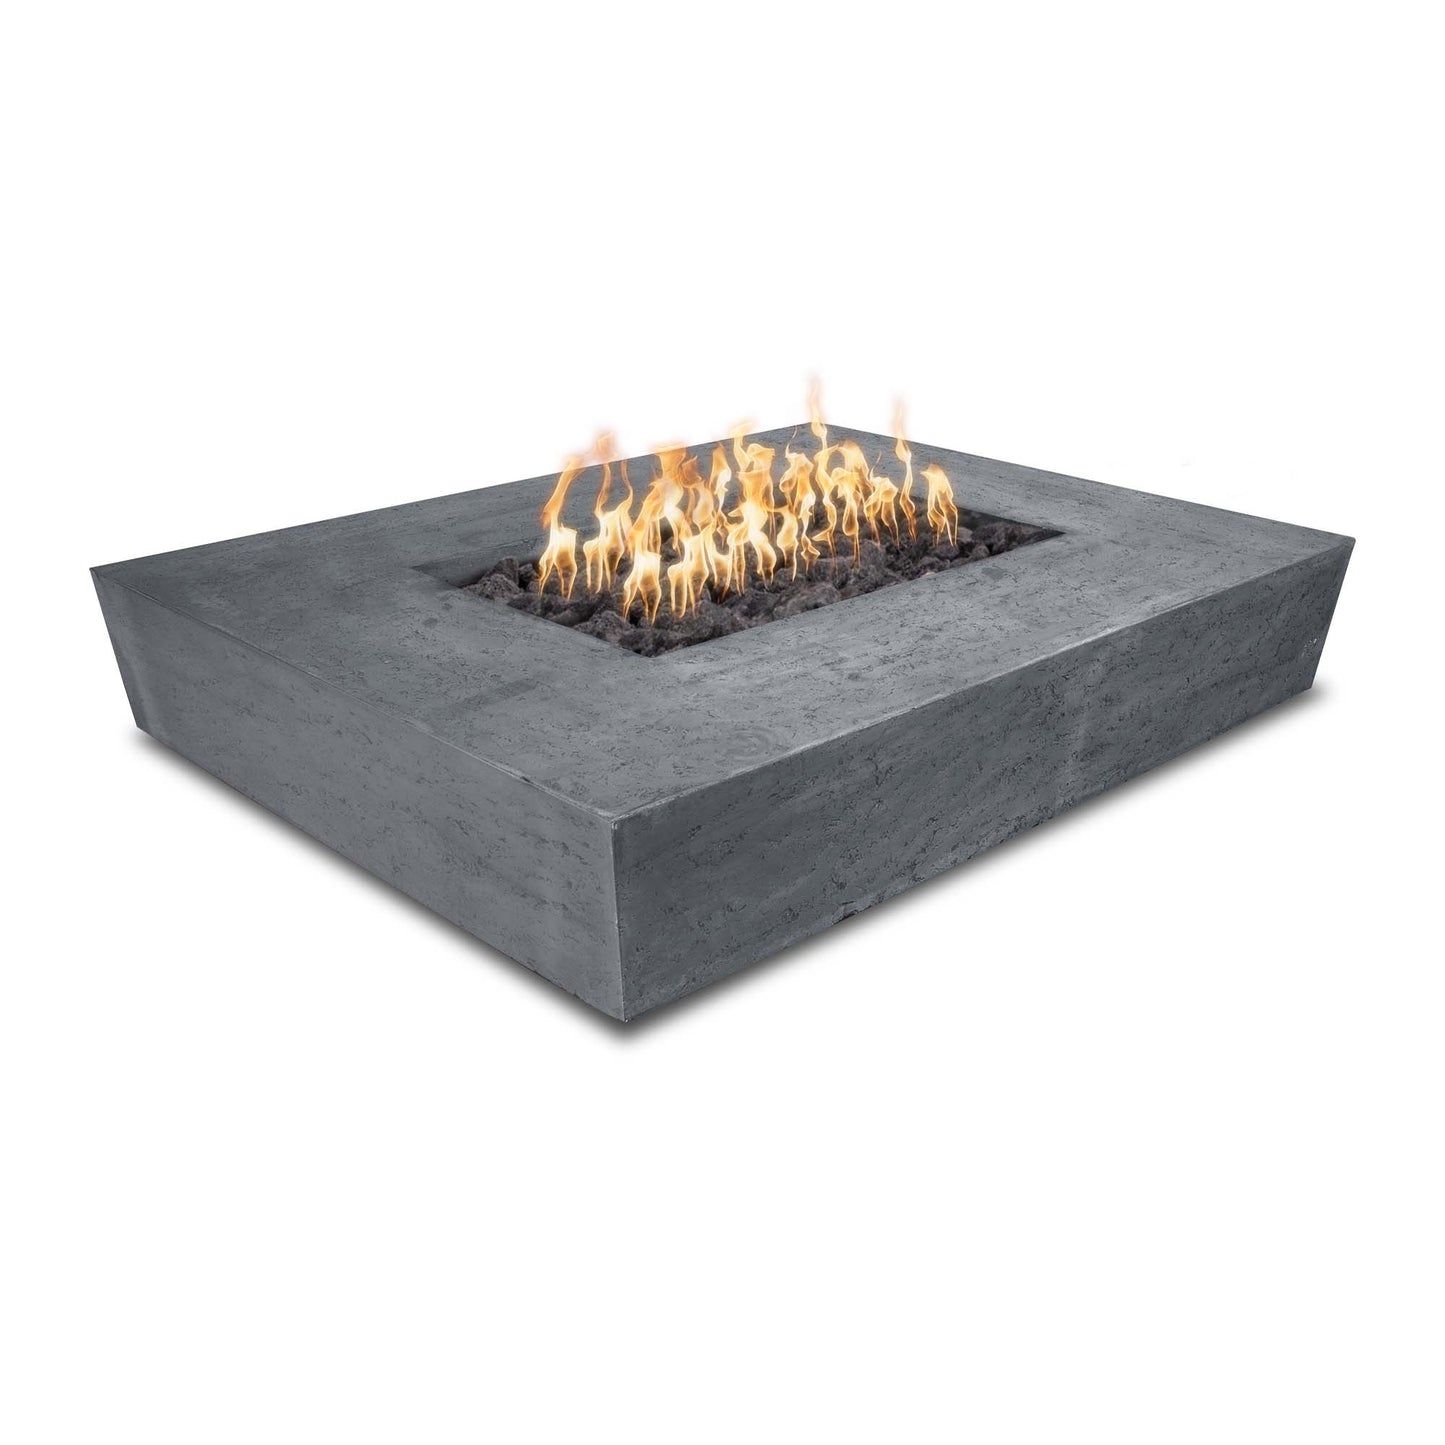 The Outdoor Plus Rectangular Heiko 58" Metallic Copper GFRC Concrete Natural Gas Fire Pit with Match Lit with Flame Sense Ignition